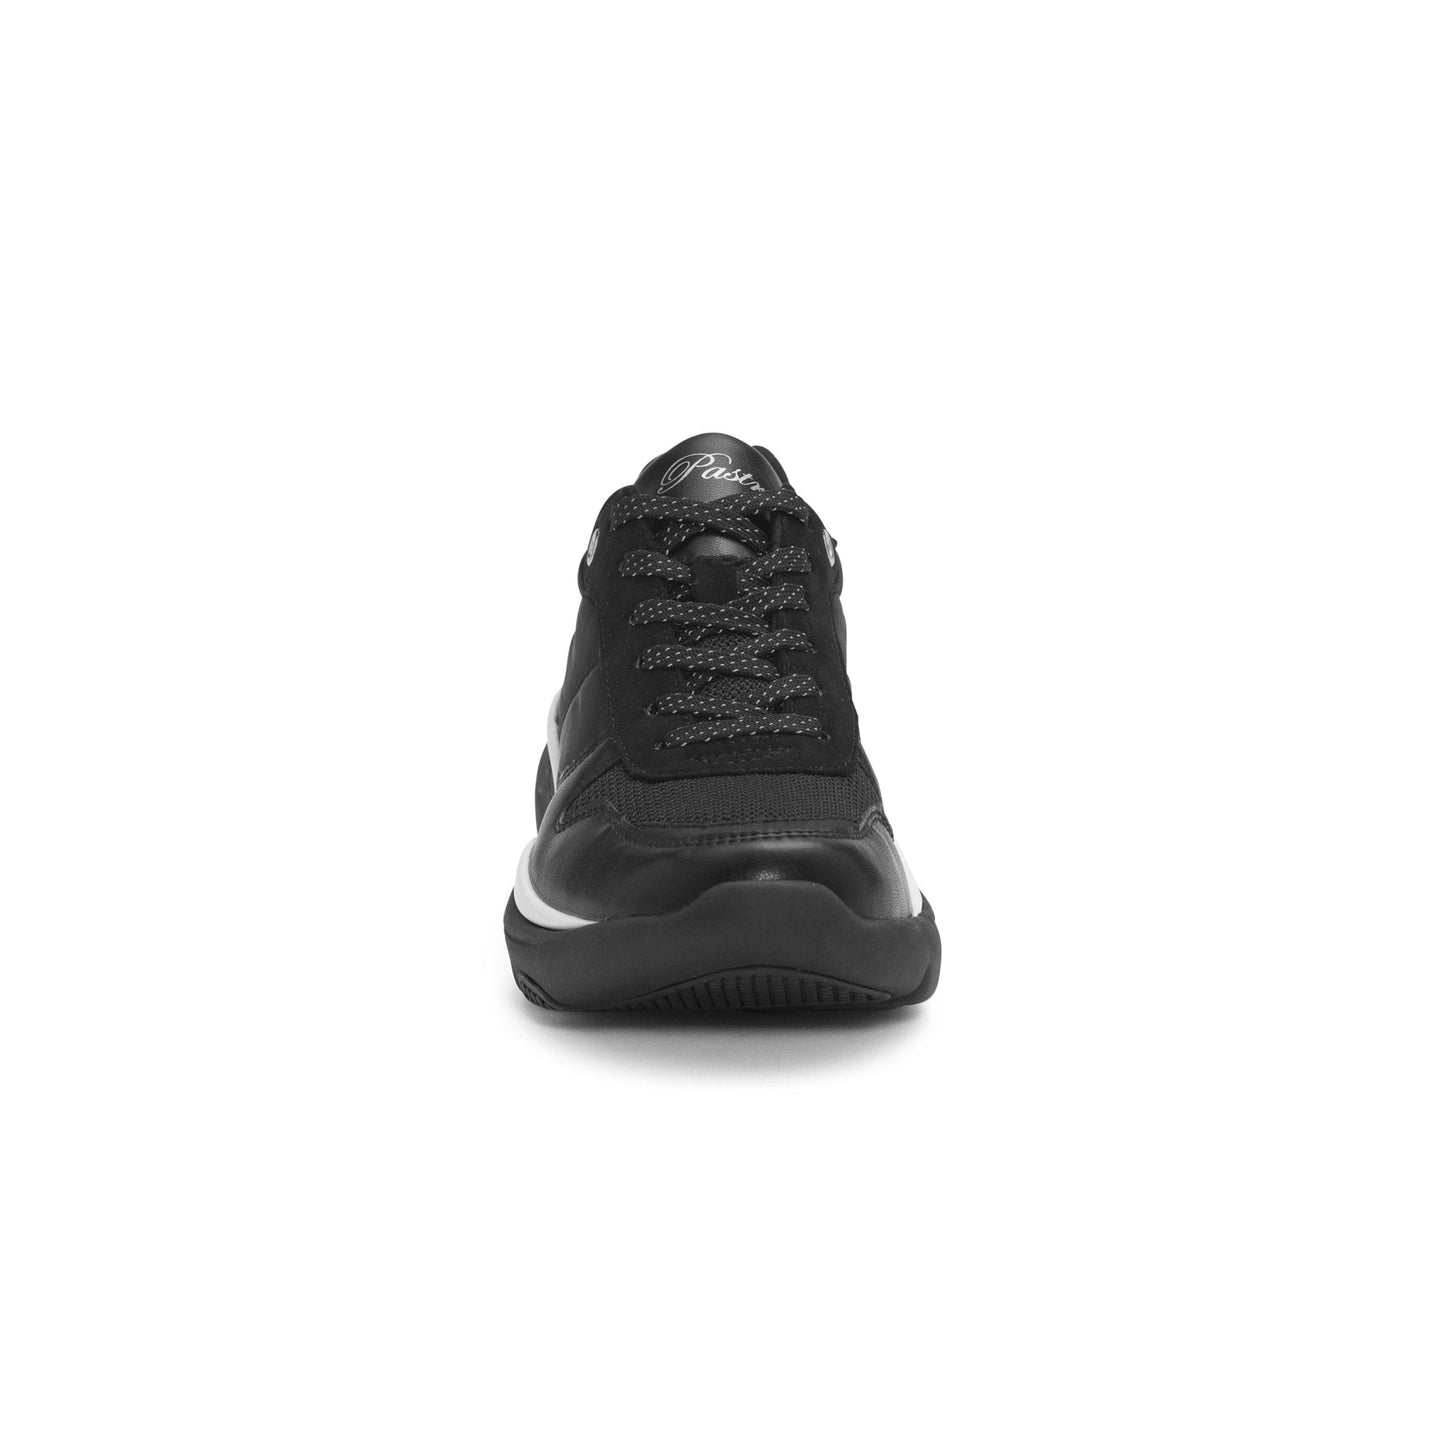 Pastry Adult Women's Carla Sneaker in Black/White front view